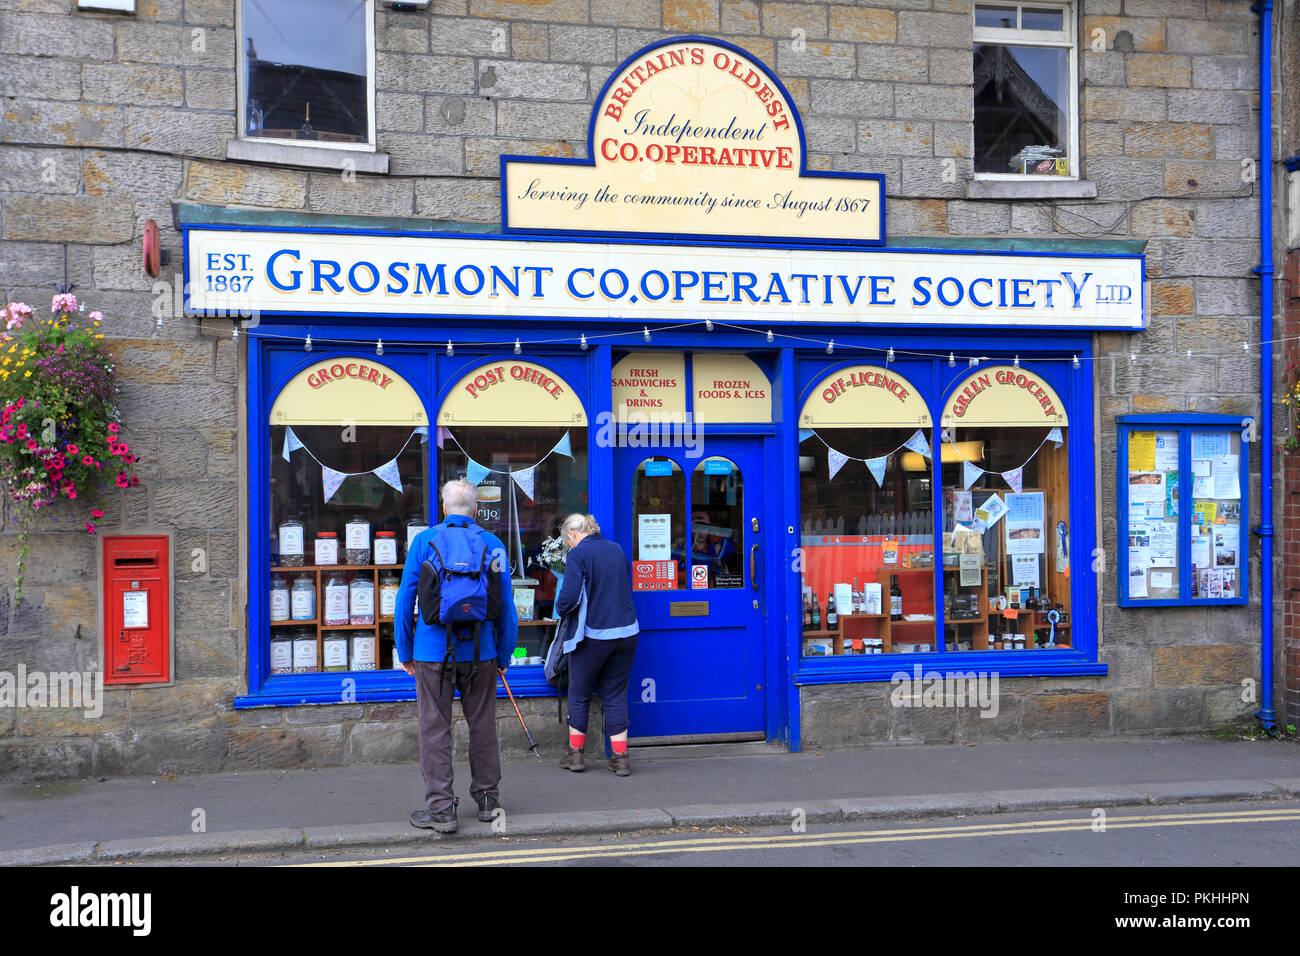 A couple of walkers outside Grosmont Cooperative Society Ltd, Britain's oldest Independent Cooperative, Grosmont, North Yorkshire, England, UK. Stock Photo